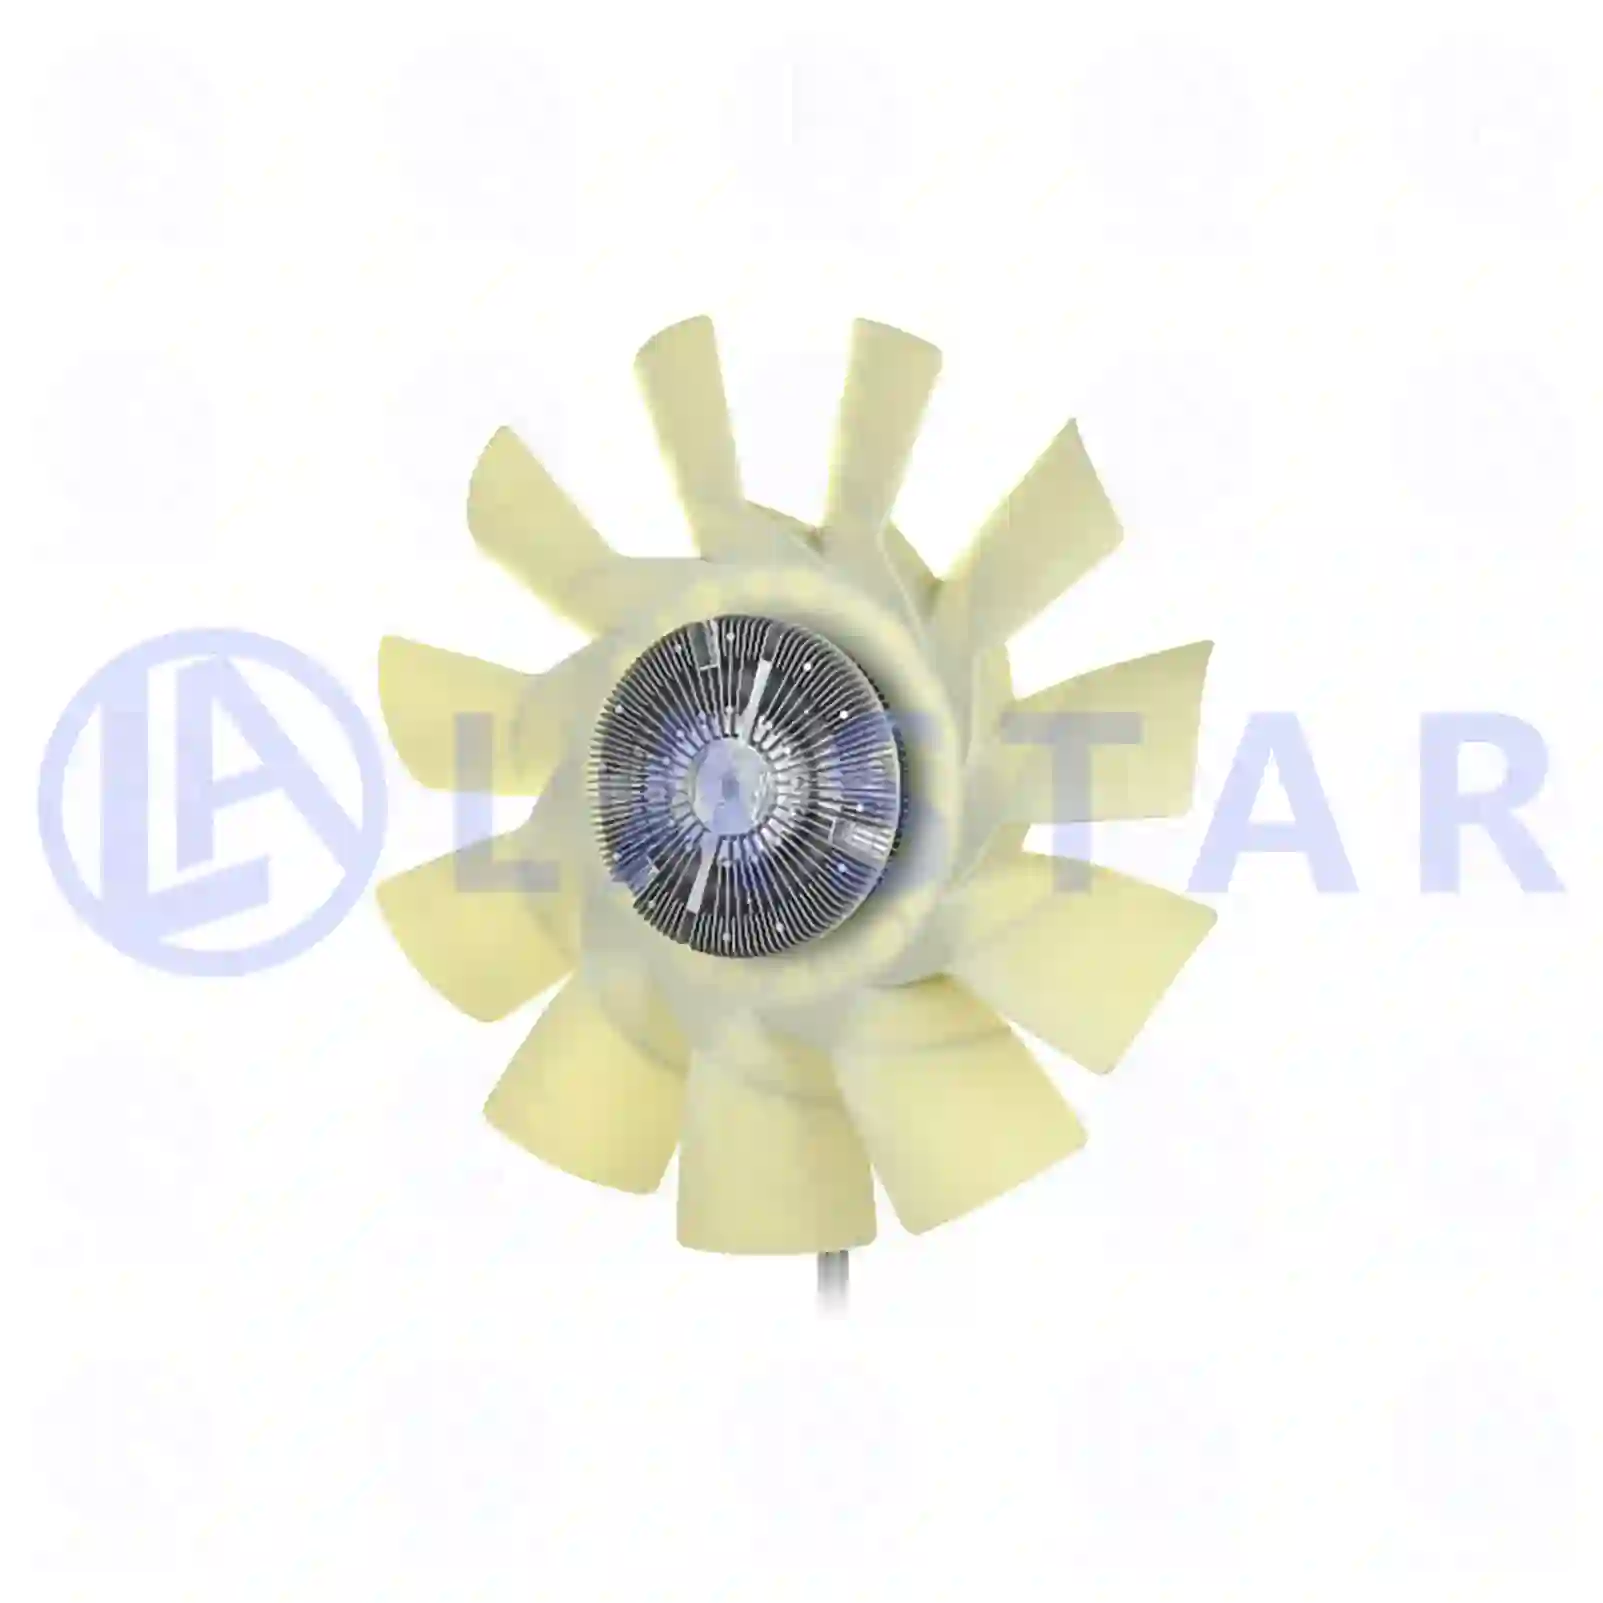 Fan with clutch, 77709922, 1780958, 2078559, 2410083, ZG00397-0008 ||  77709922 Lastar Spare Part | Truck Spare Parts, Auotomotive Spare Parts Fan with clutch, 77709922, 1780958, 2078559, 2410083, ZG00397-0008 ||  77709922 Lastar Spare Part | Truck Spare Parts, Auotomotive Spare Parts